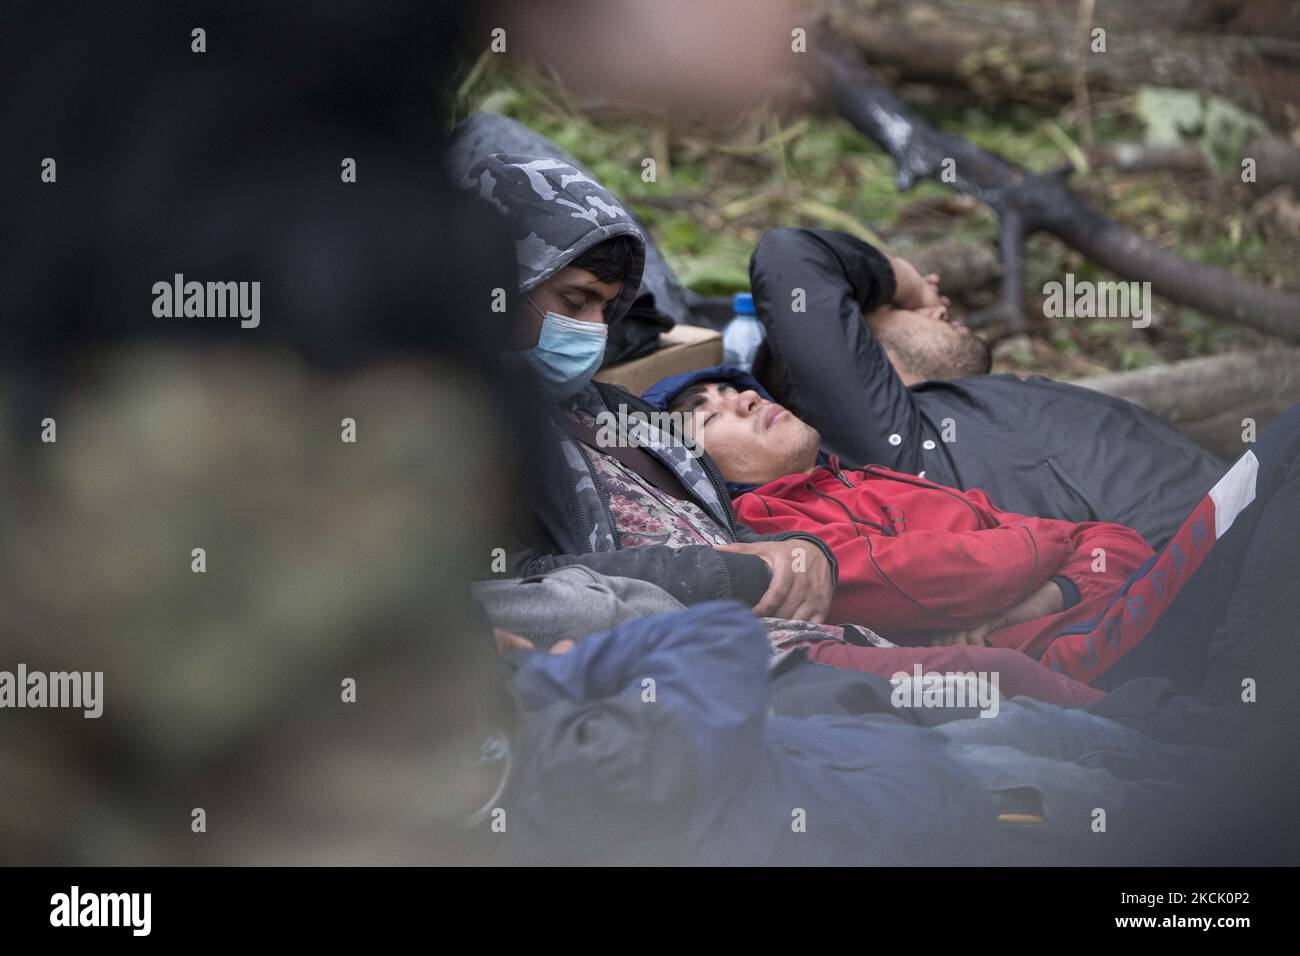 A refugees seen in makeshift camp after illegal border crossing in Usnarz Gorny on August 19, 2021. (Photo by Maciej Luczniewski/NurPhoto) Stock Photo